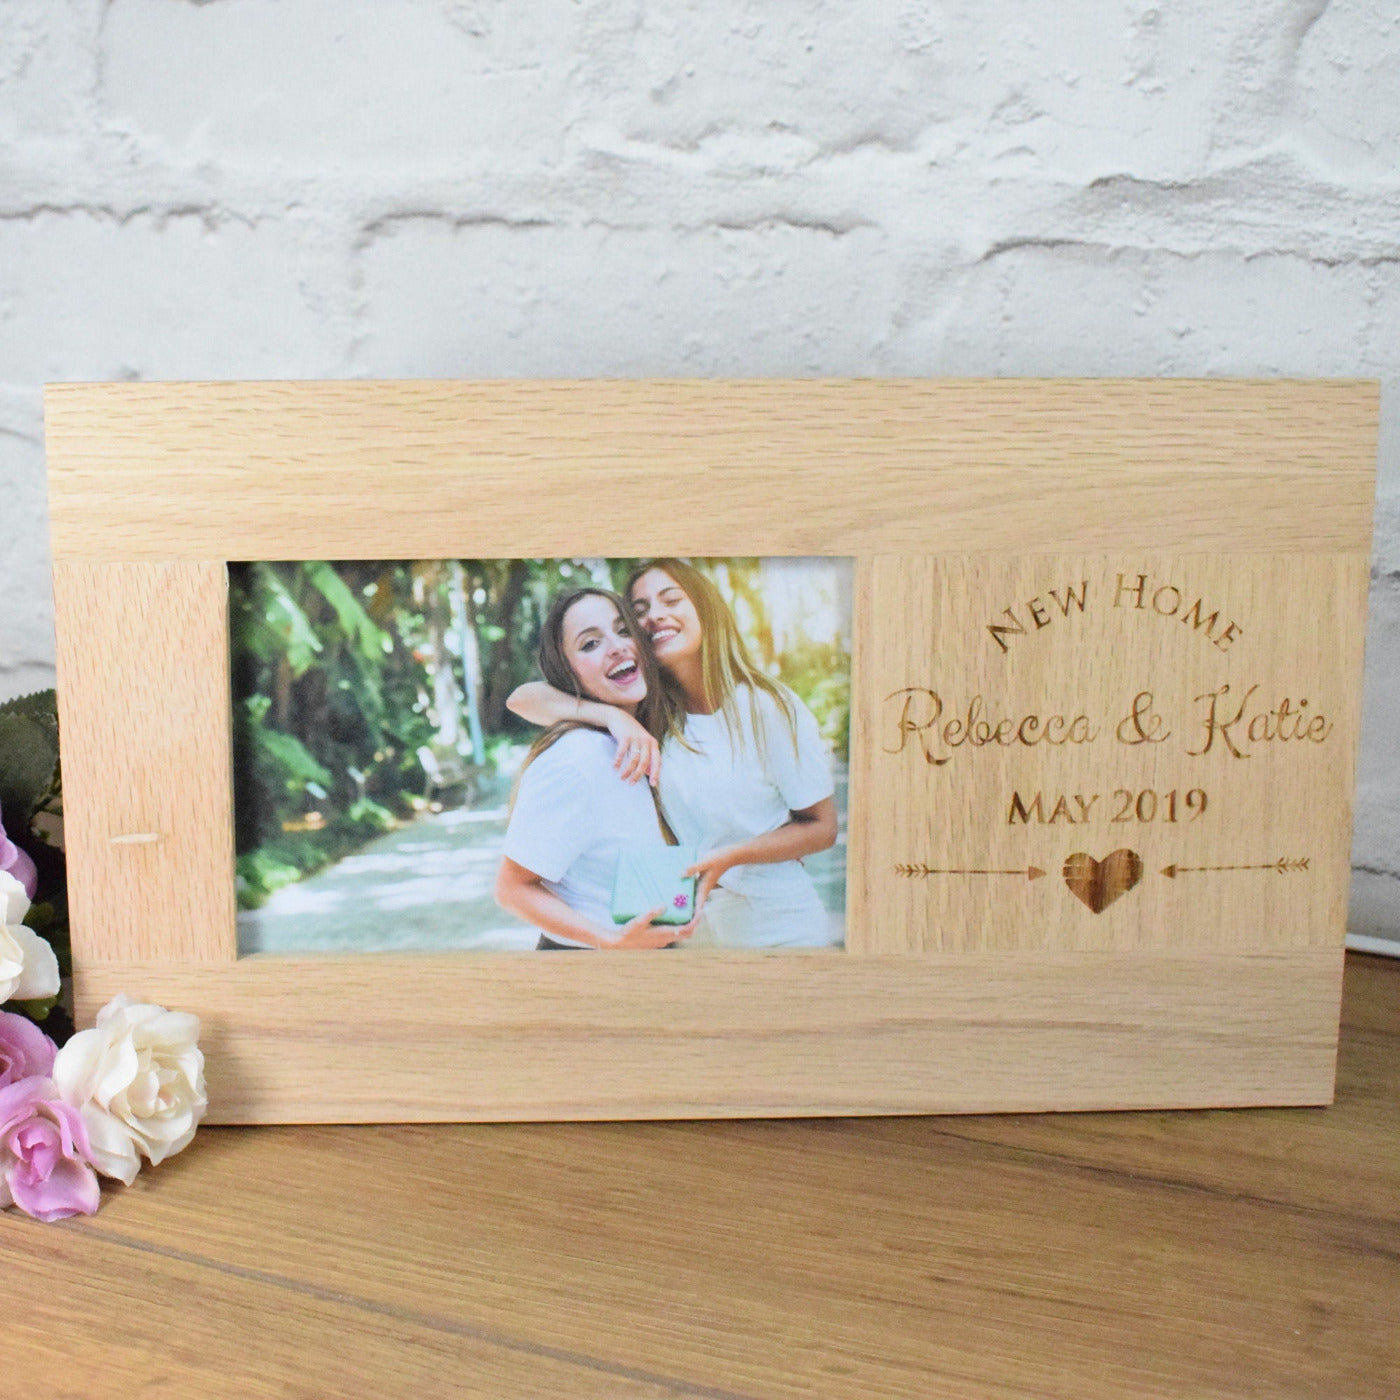 Personalised Photo Frames, Personalised Picture Frames, Solid Oak 6 x 4 Inch Frame, New Home Gifts New House Photo Frame, Housewarming Gift